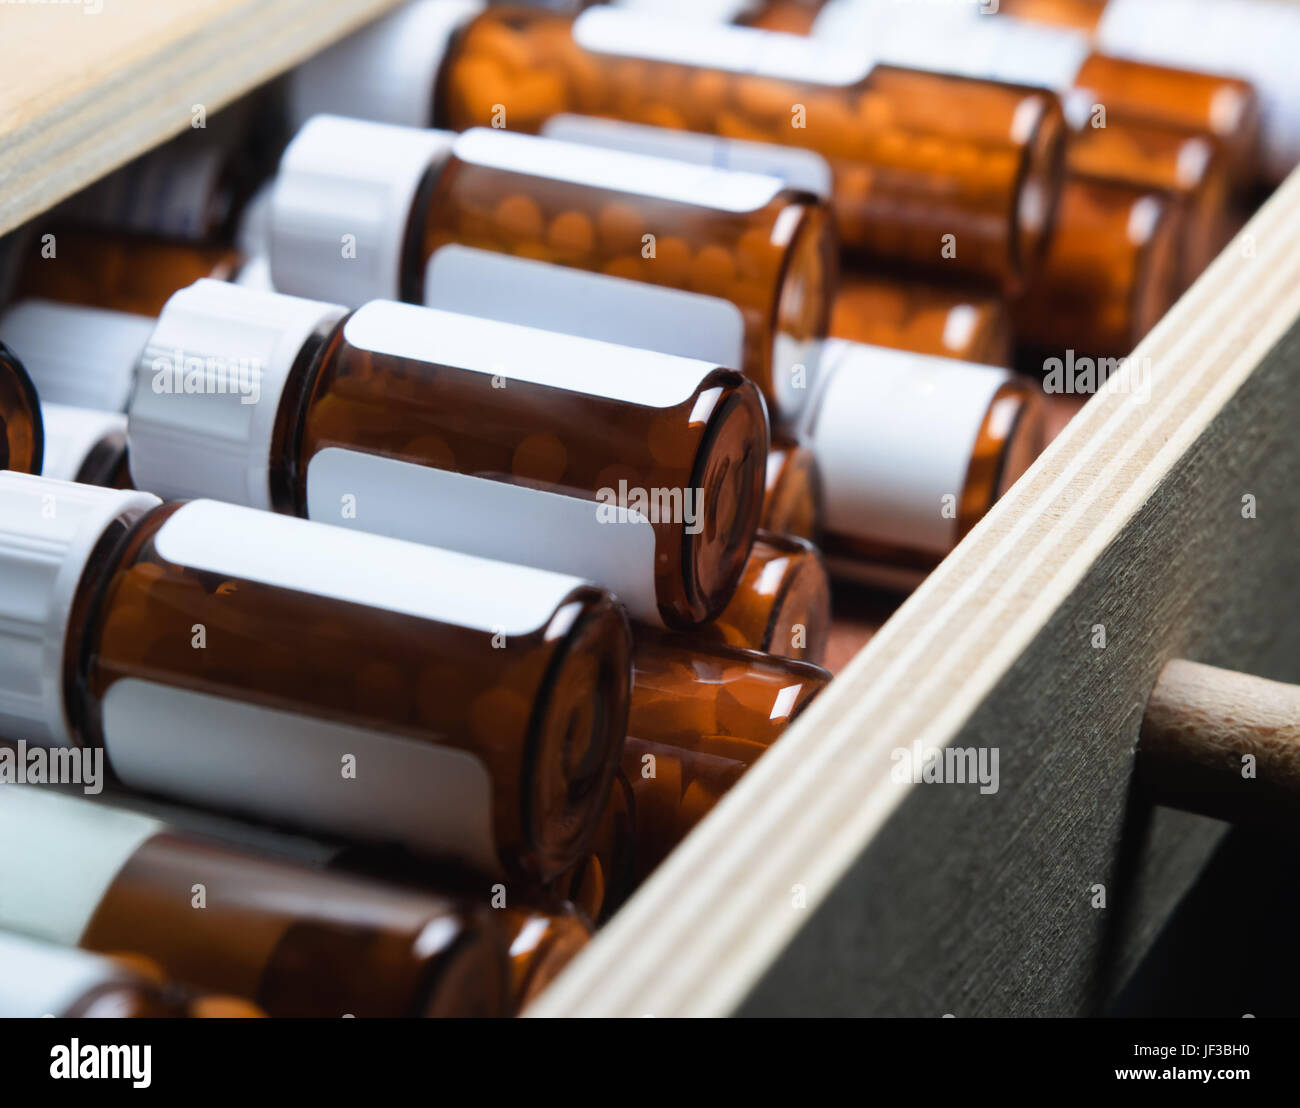 An open drawer, filled with many amber glass pill bottles containing homeopathic remedies.  Horizontal (landscape) orientation. Stock Photo